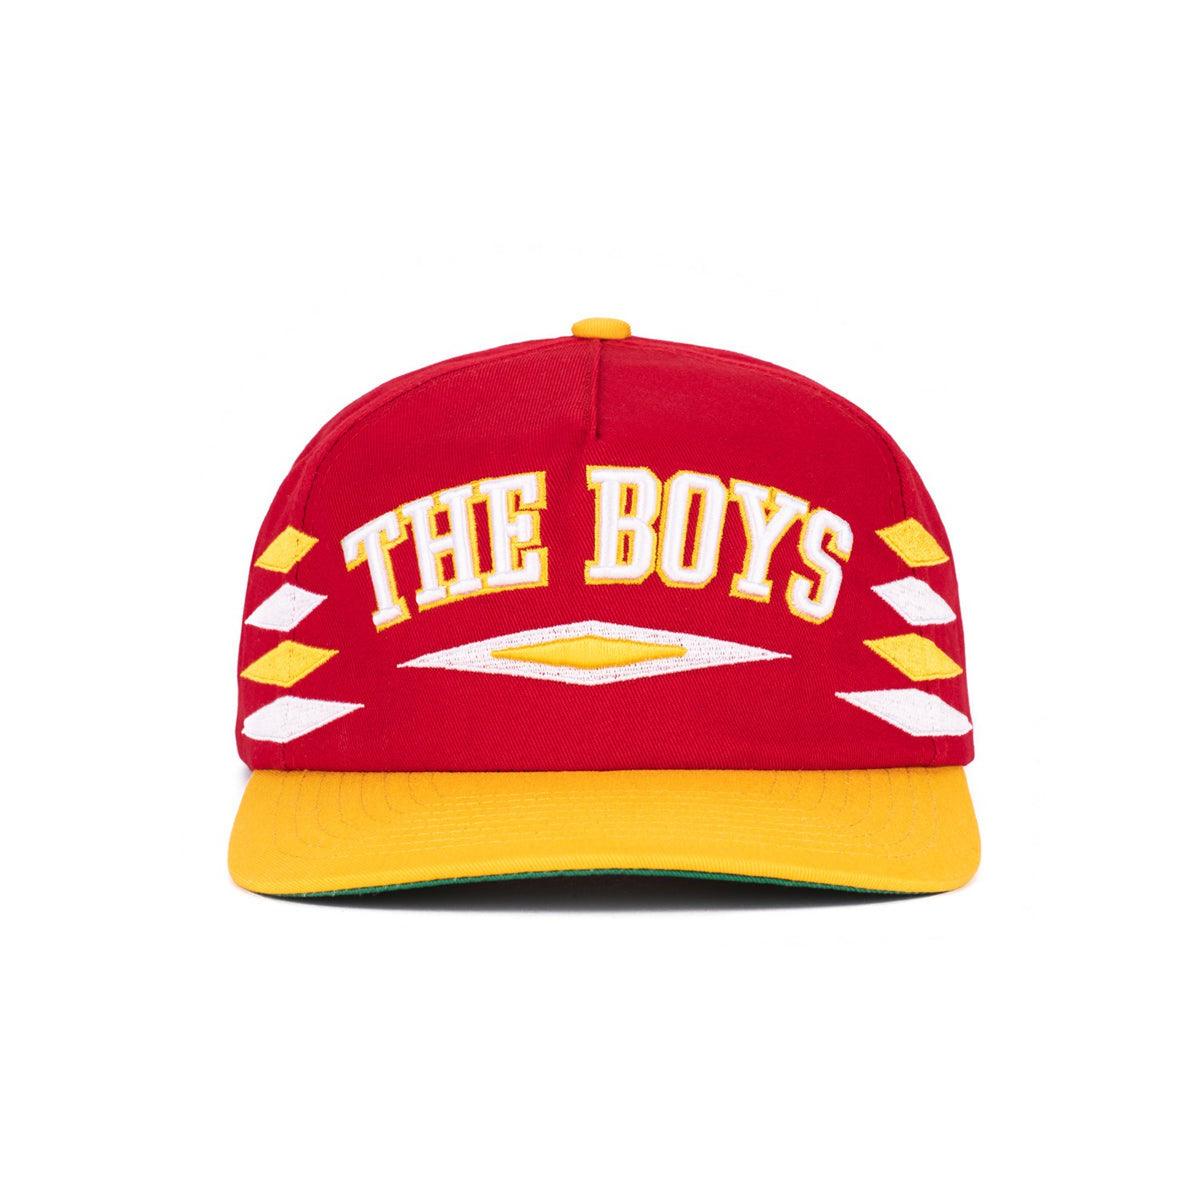  Trendy hat Father's Day Hats just a boy who Loves Plumber  Baseball Cap Retro Golf Caps Gifts for Mom,Running Caps Suitable for Beach  Accessories for Vacation : Clothing, Shoes & Jewelry